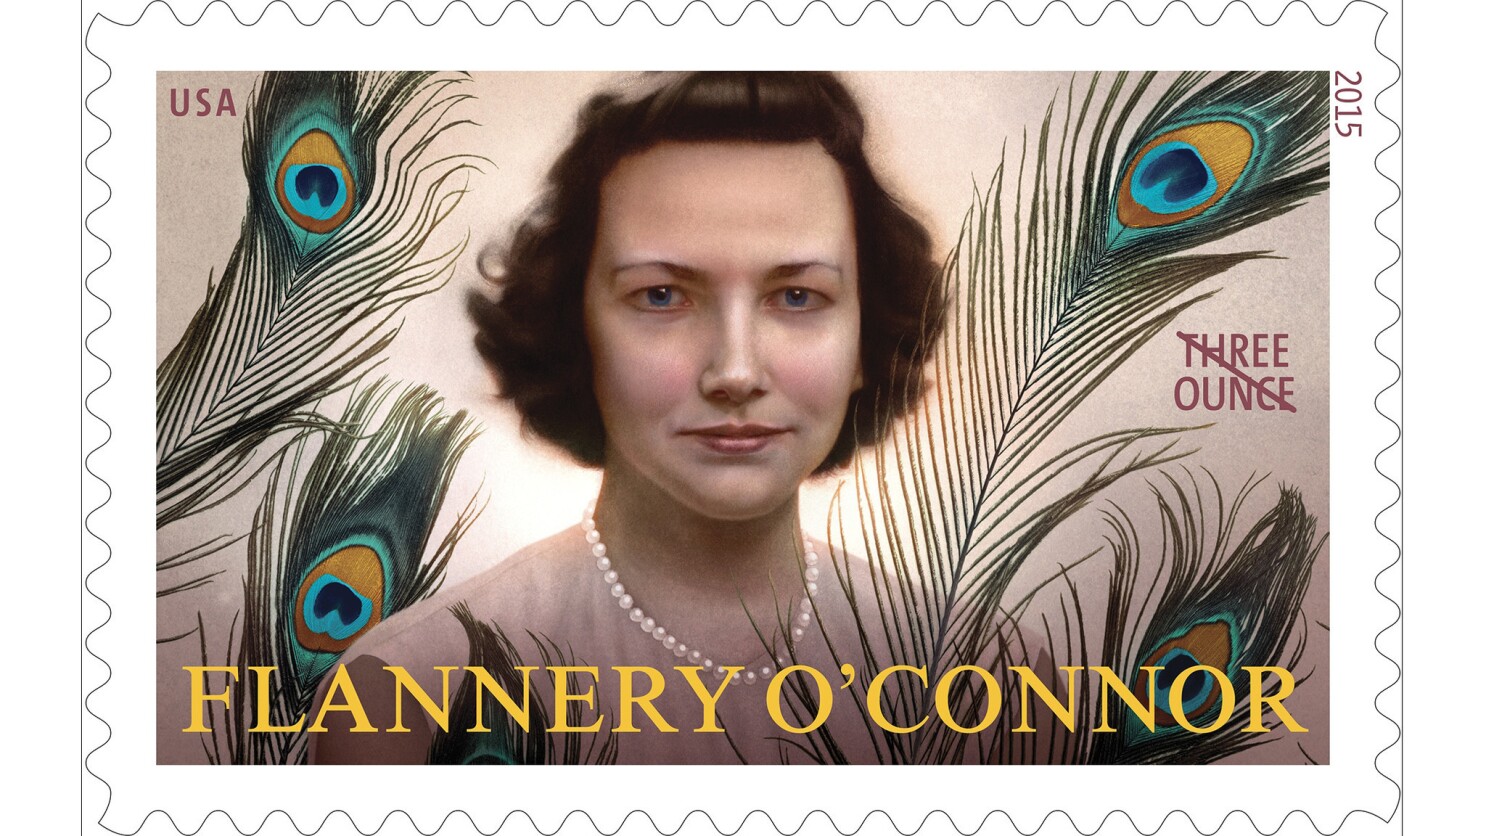 Flannery O'Connor to appear on new U.S. postage stamp - Los ...